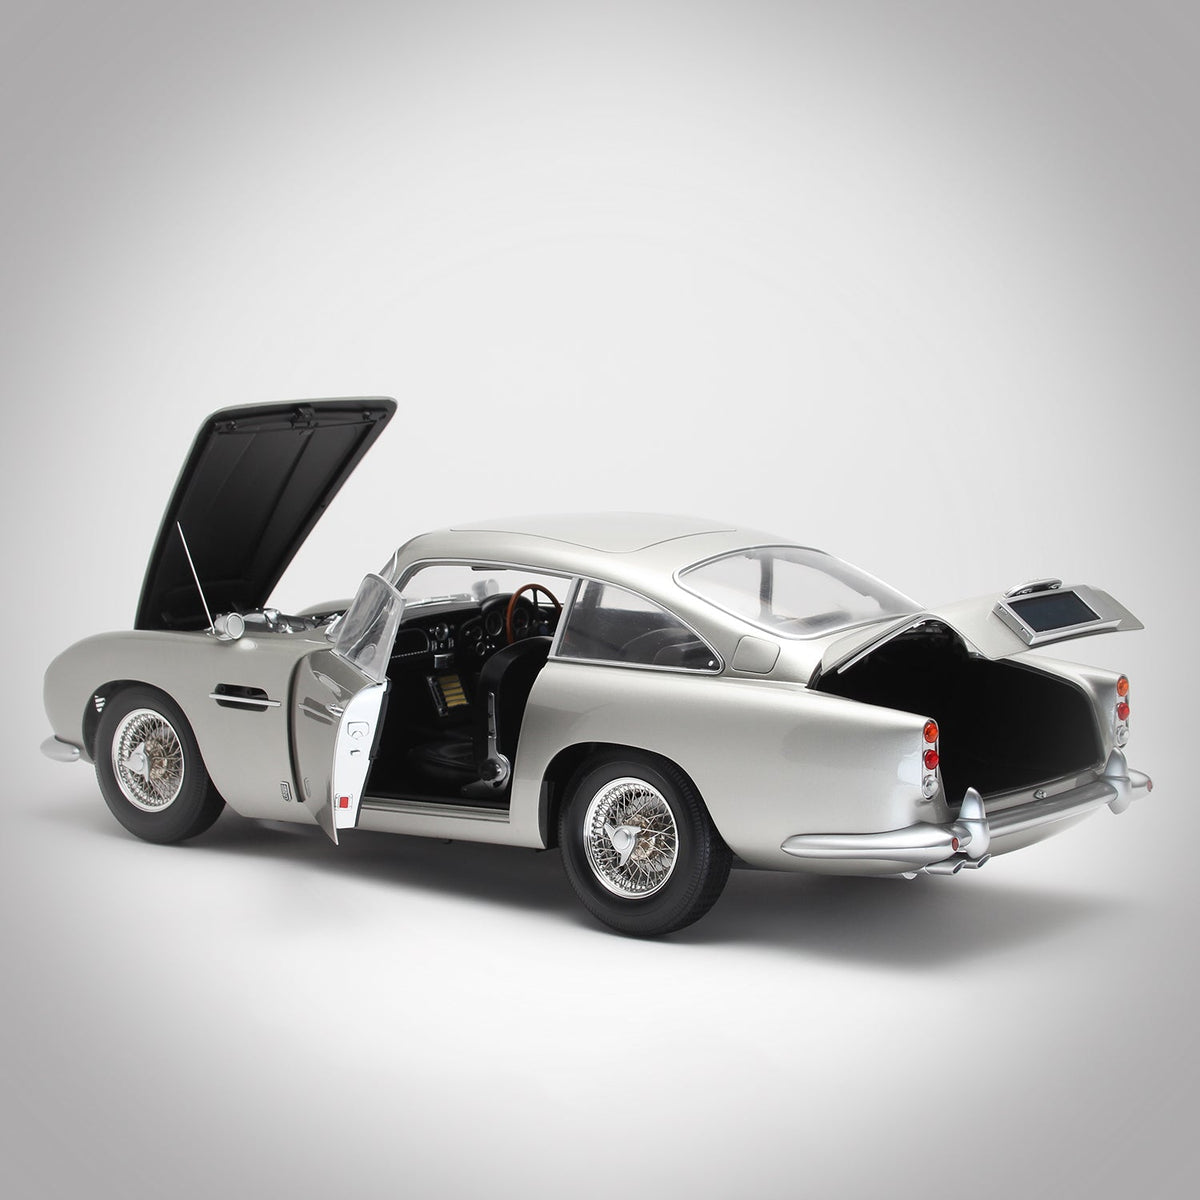 James Bond No Time To Die Aston Martin DB5 Model Car Kit - Numbered Collector&#39;s Edition Subscription - By Agora Models